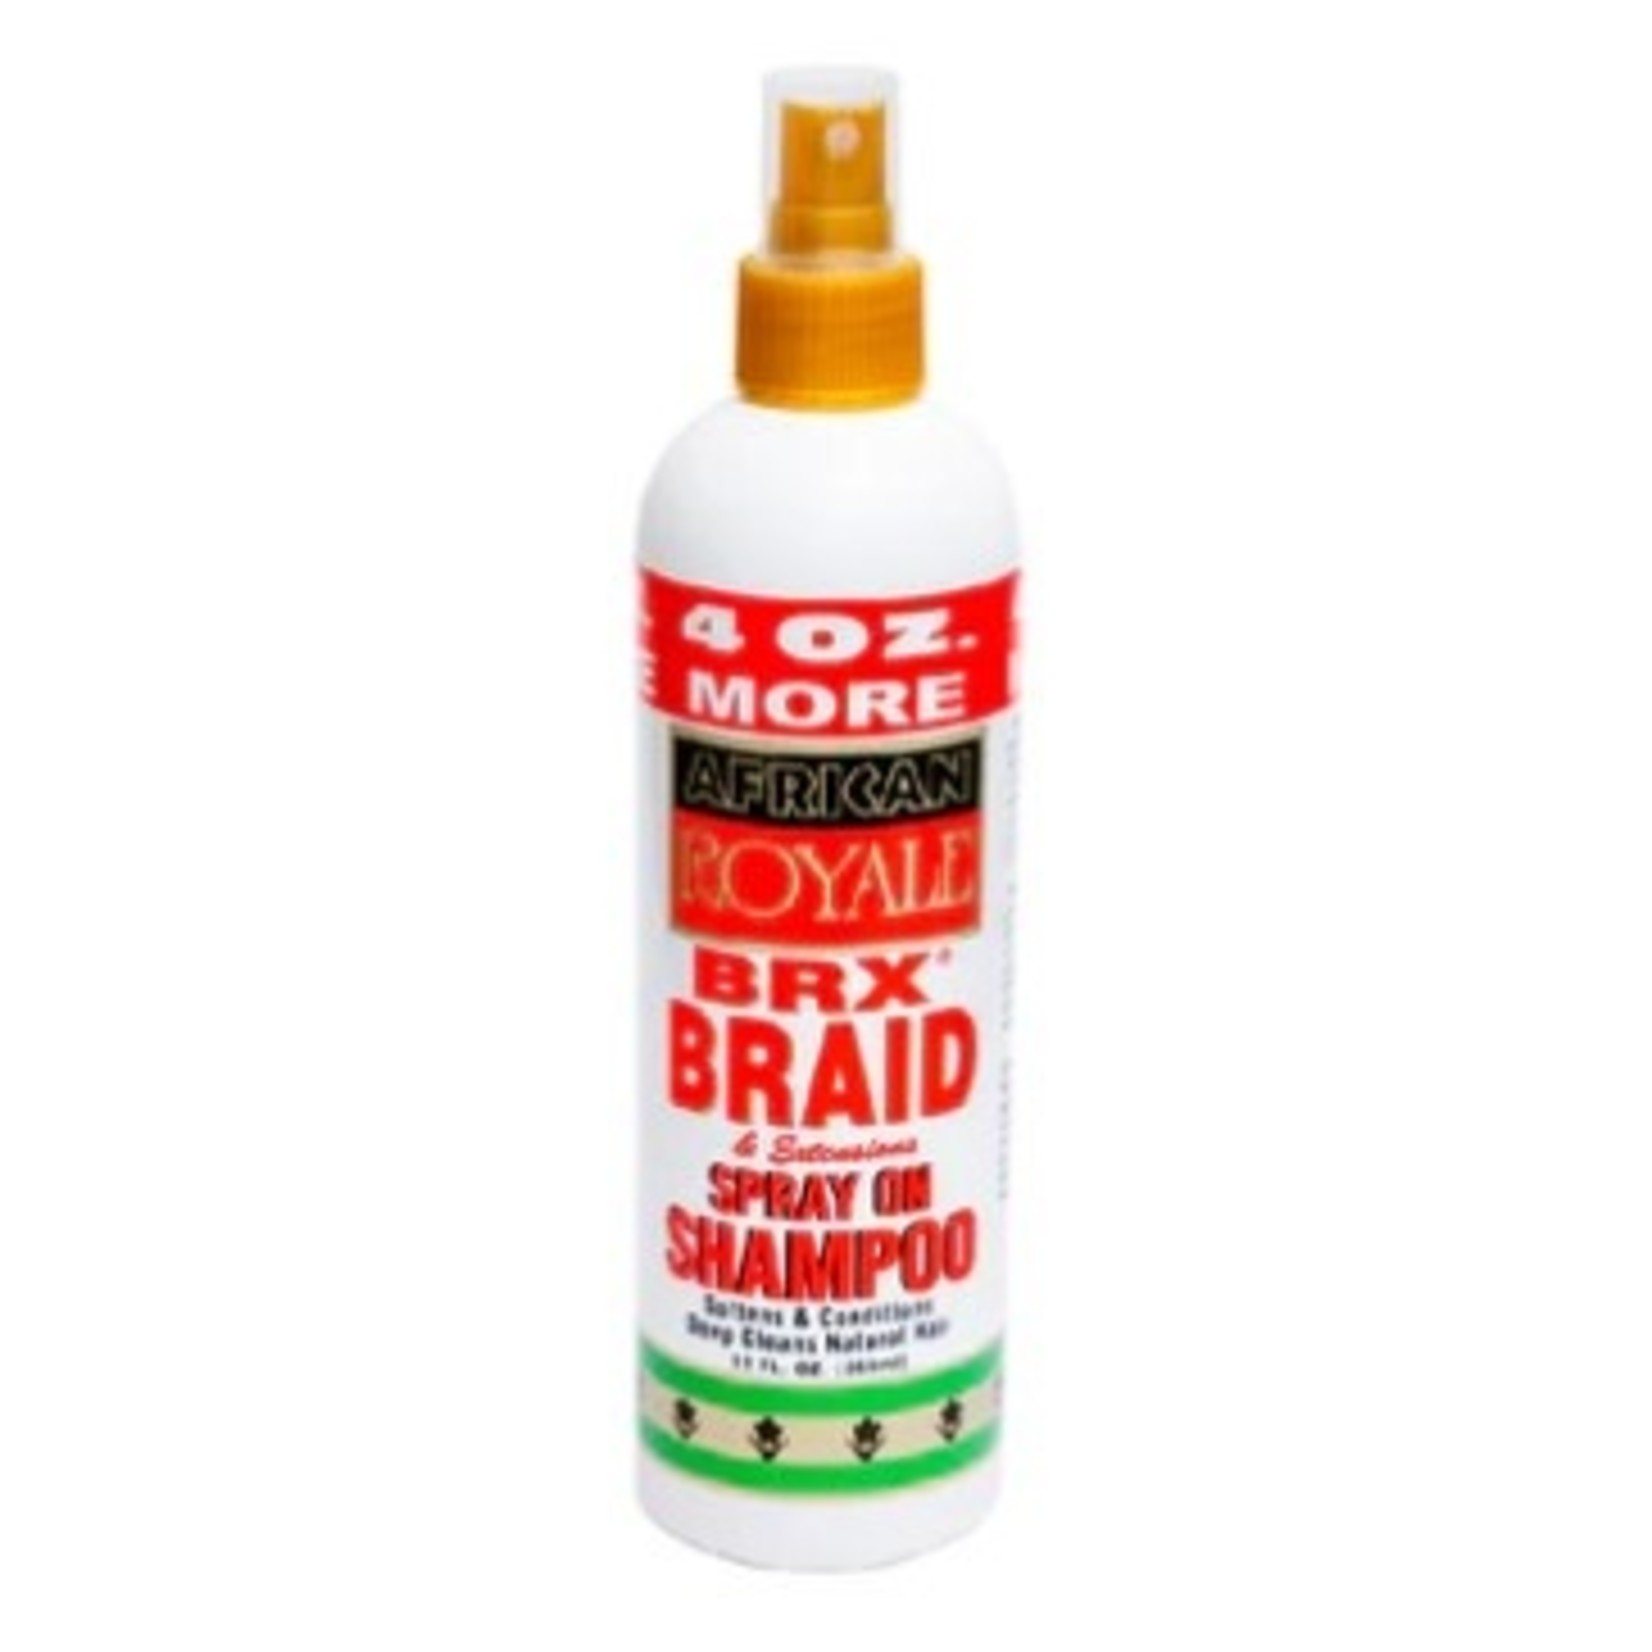 African Royale African Royale Braid and Extensions Spray on Shampoo 12 oz